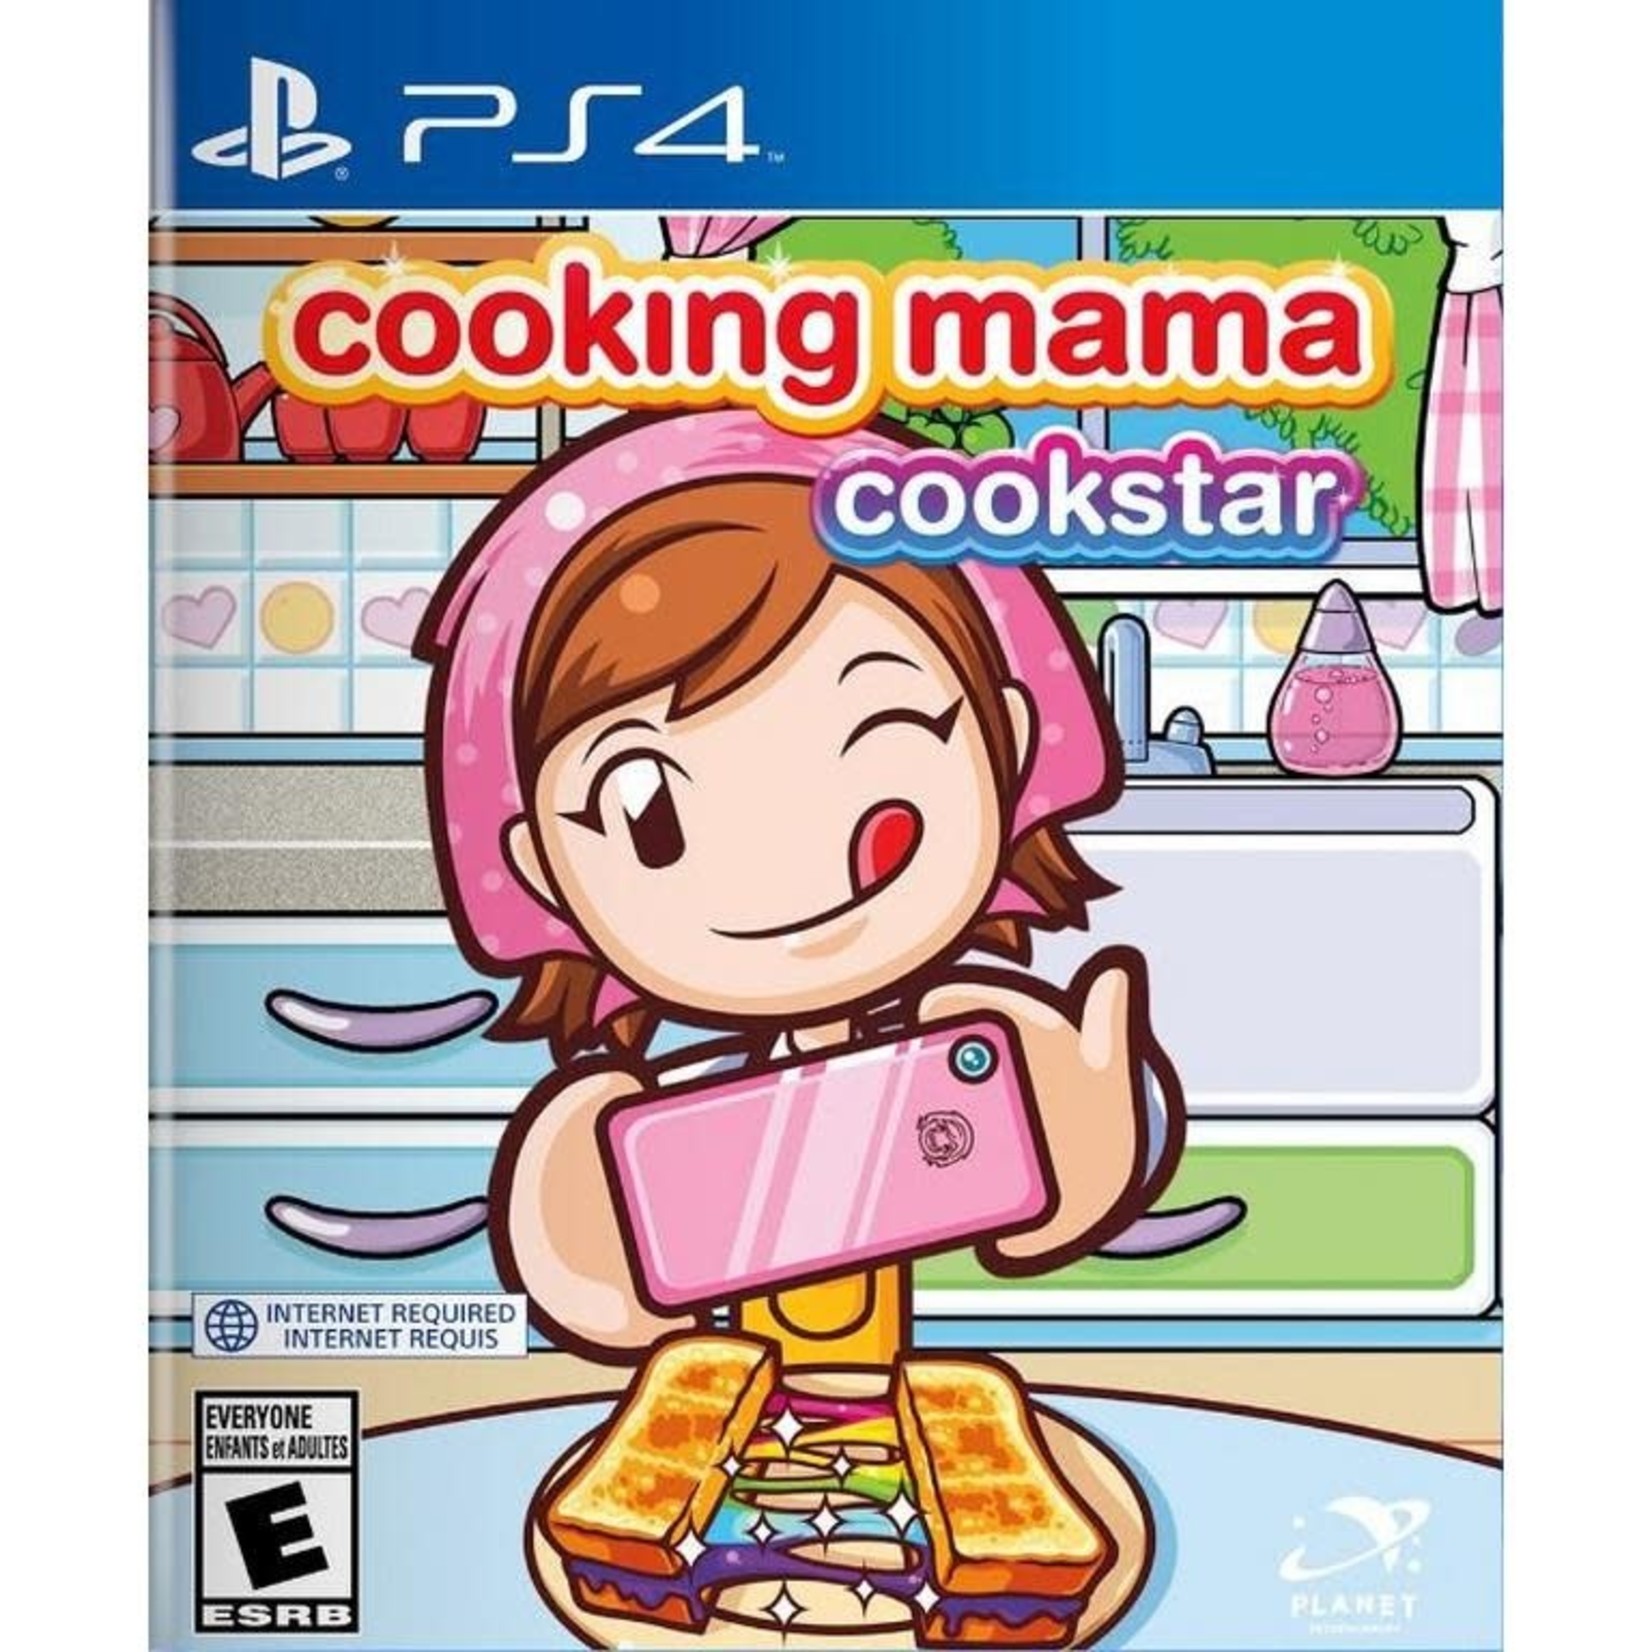 PS4-Cooking Mama: Cookstar